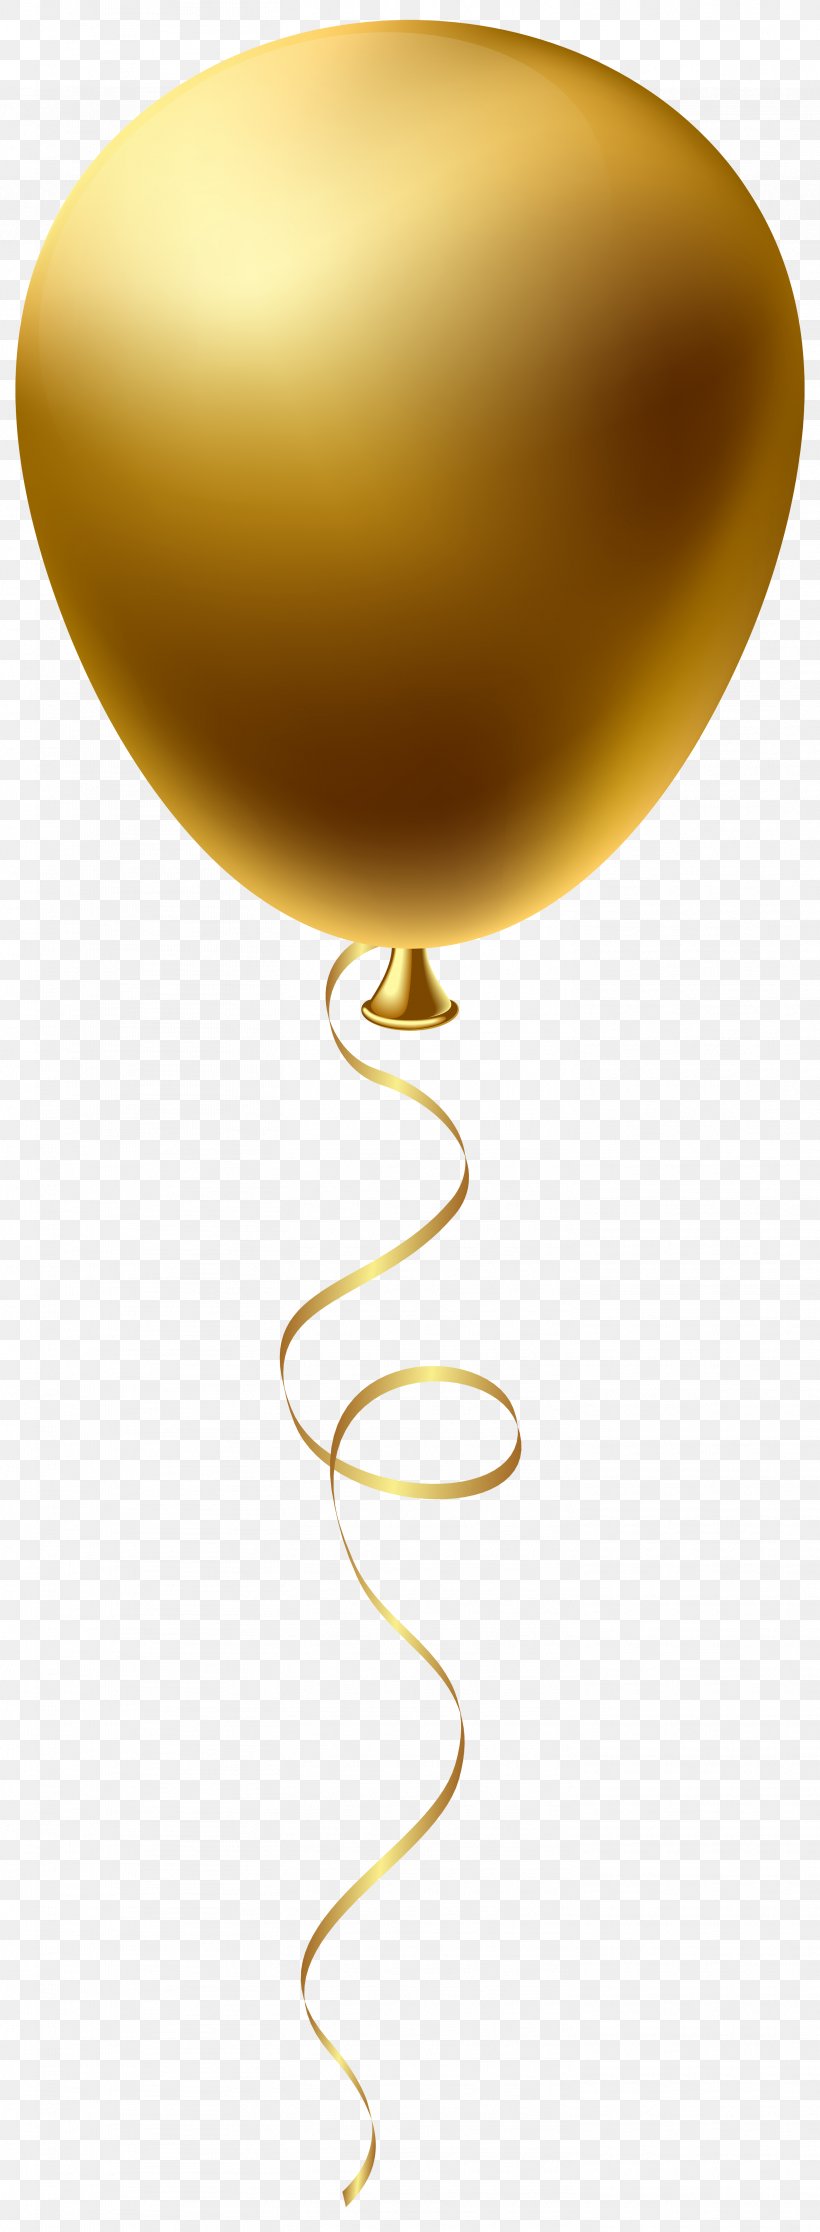 Balloon Clip Art Image Ballons Transparent, PNG, 2938x8000px, Balloon, Birthday, Gold, Party Supply, Smile Download Free